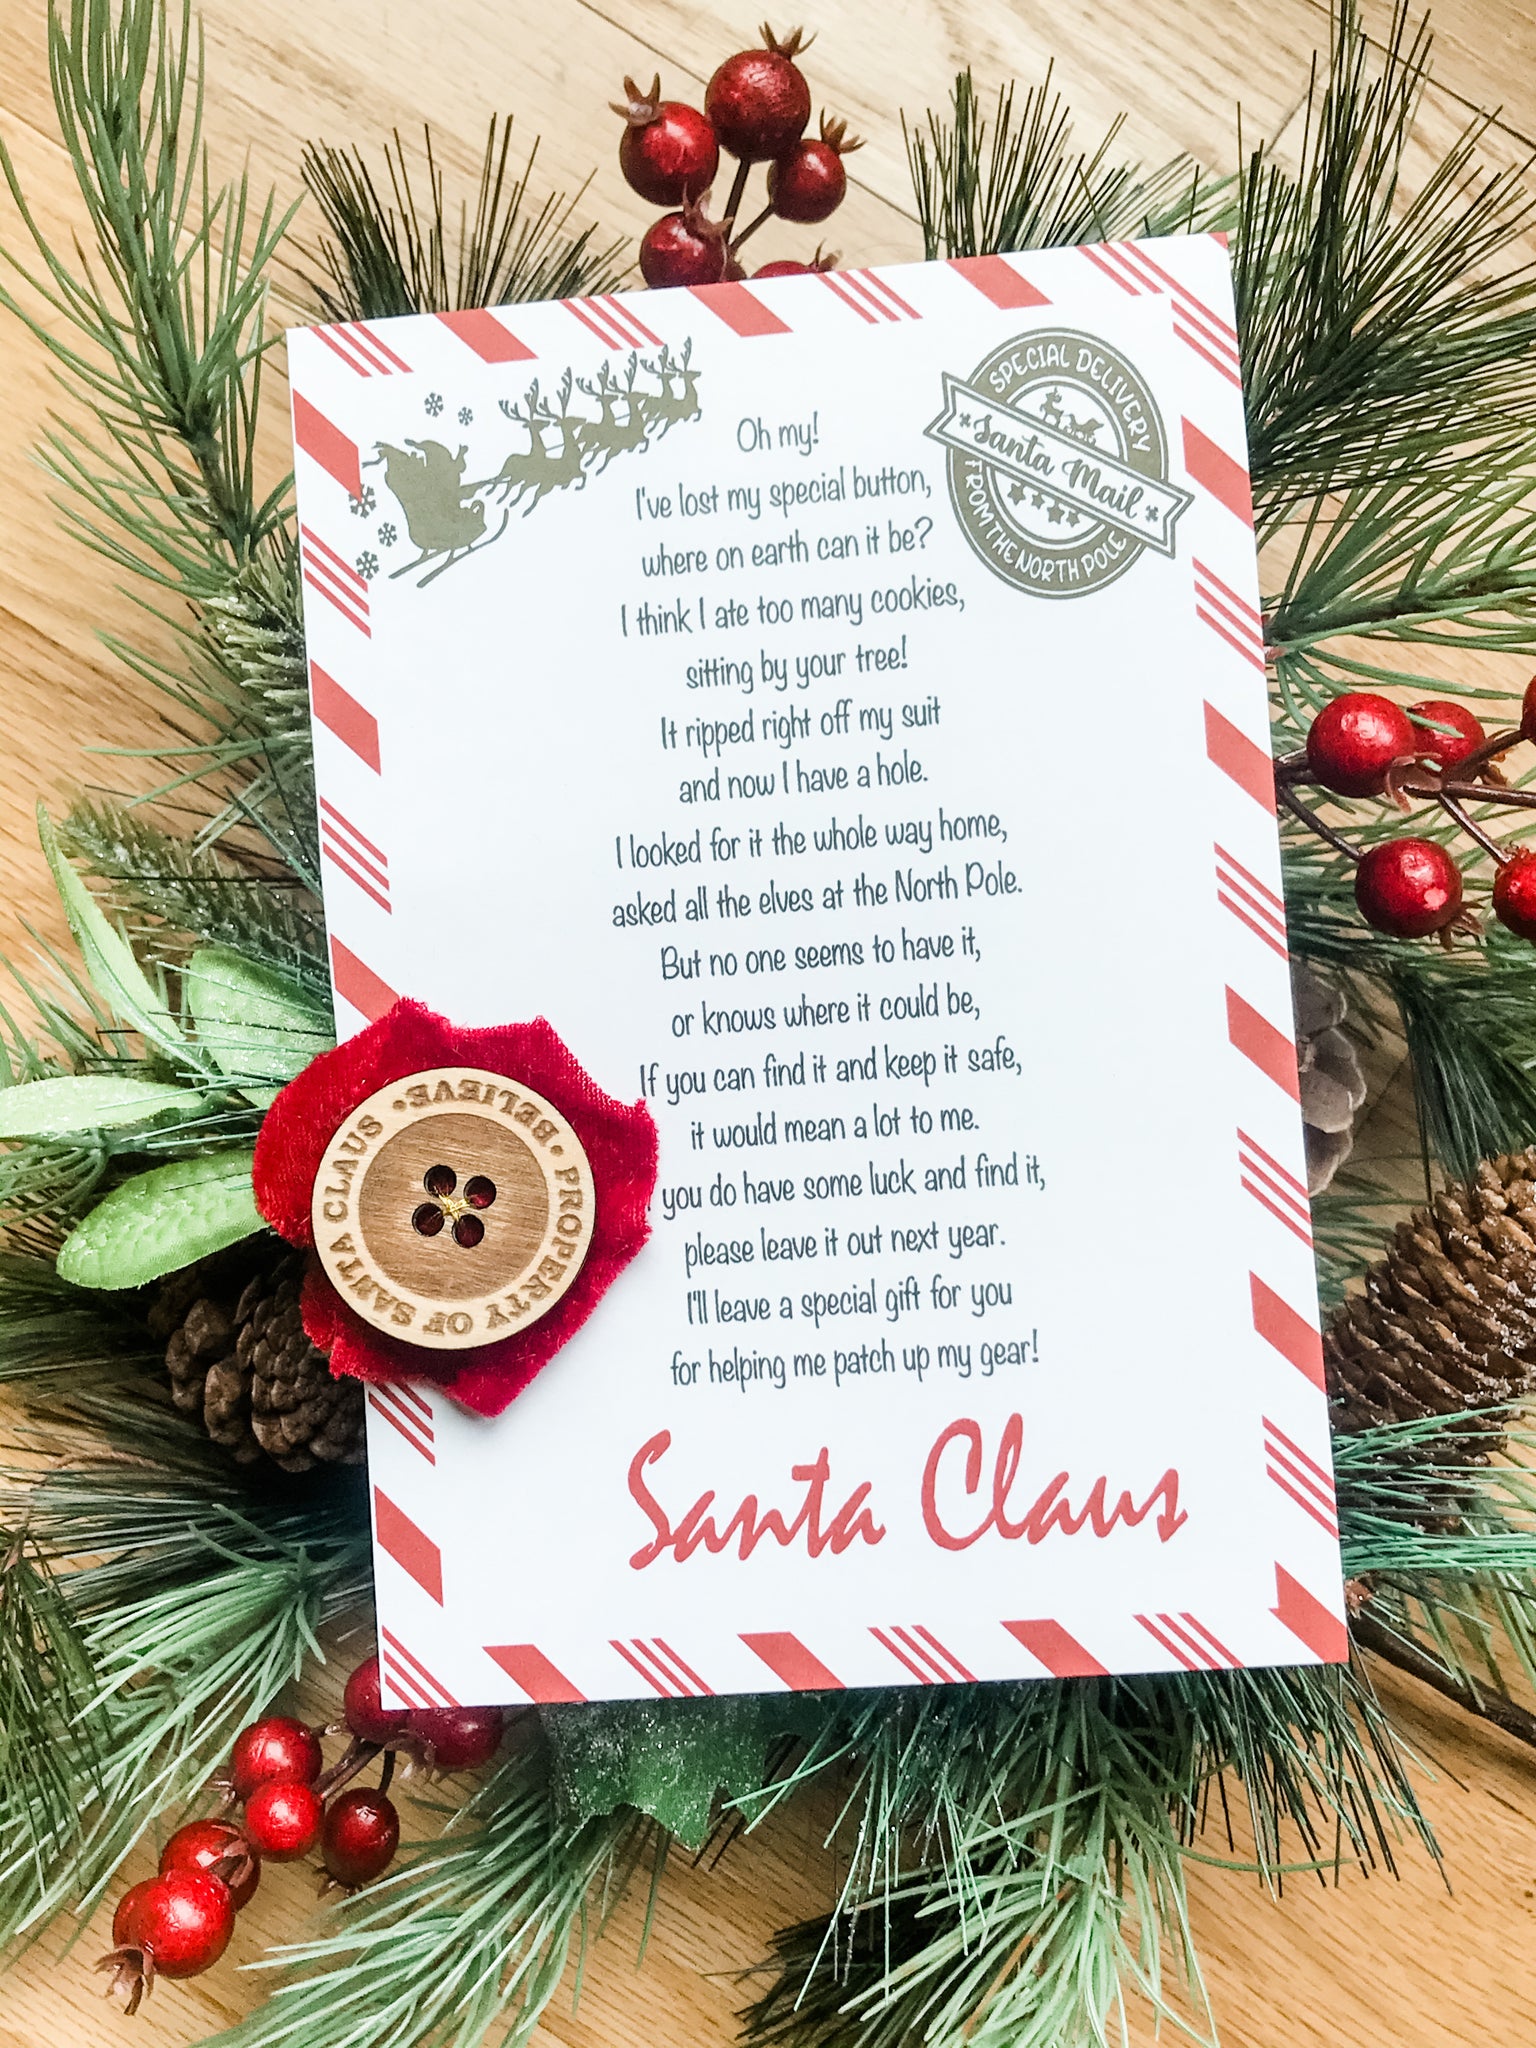 Santa’s lost button with letter